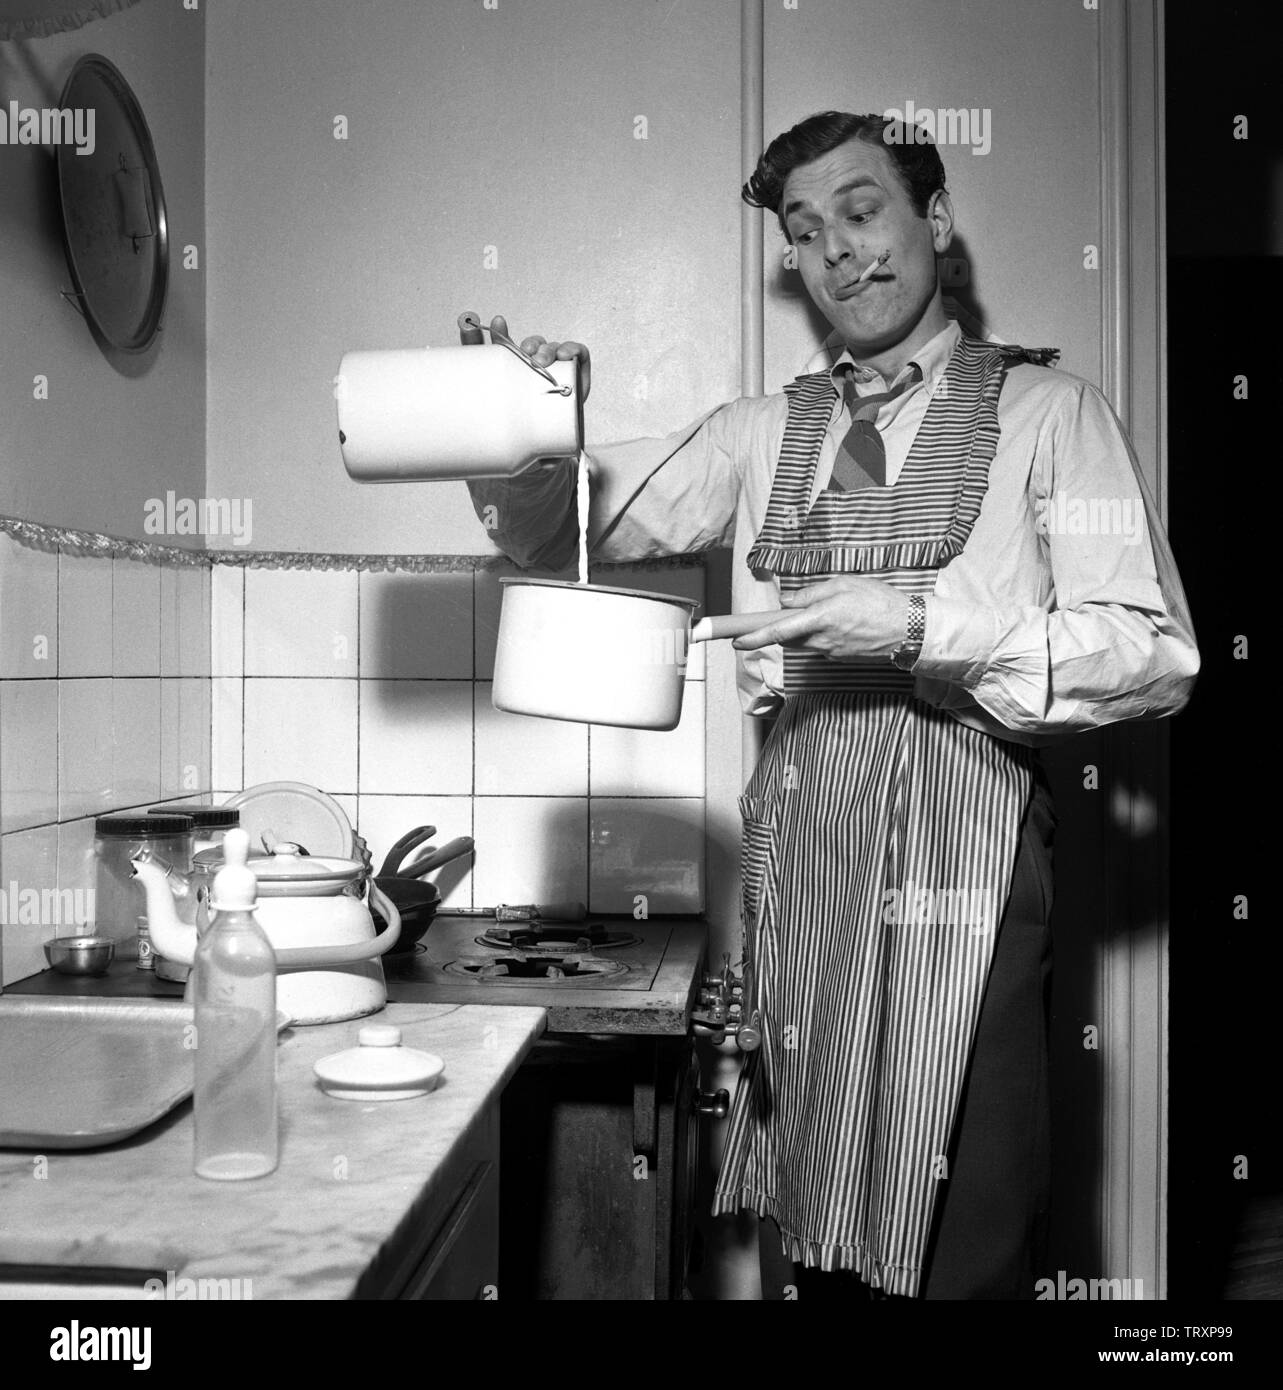 Man of the 1950s. The swedish dancer Mario Mengarelli in the kitchen busy pouring milk into a saucepan. A feeding bottle is seen on the bench and could be that his small child is waiting for a meal. Sweden 1952 ref 1958 Stock Photo